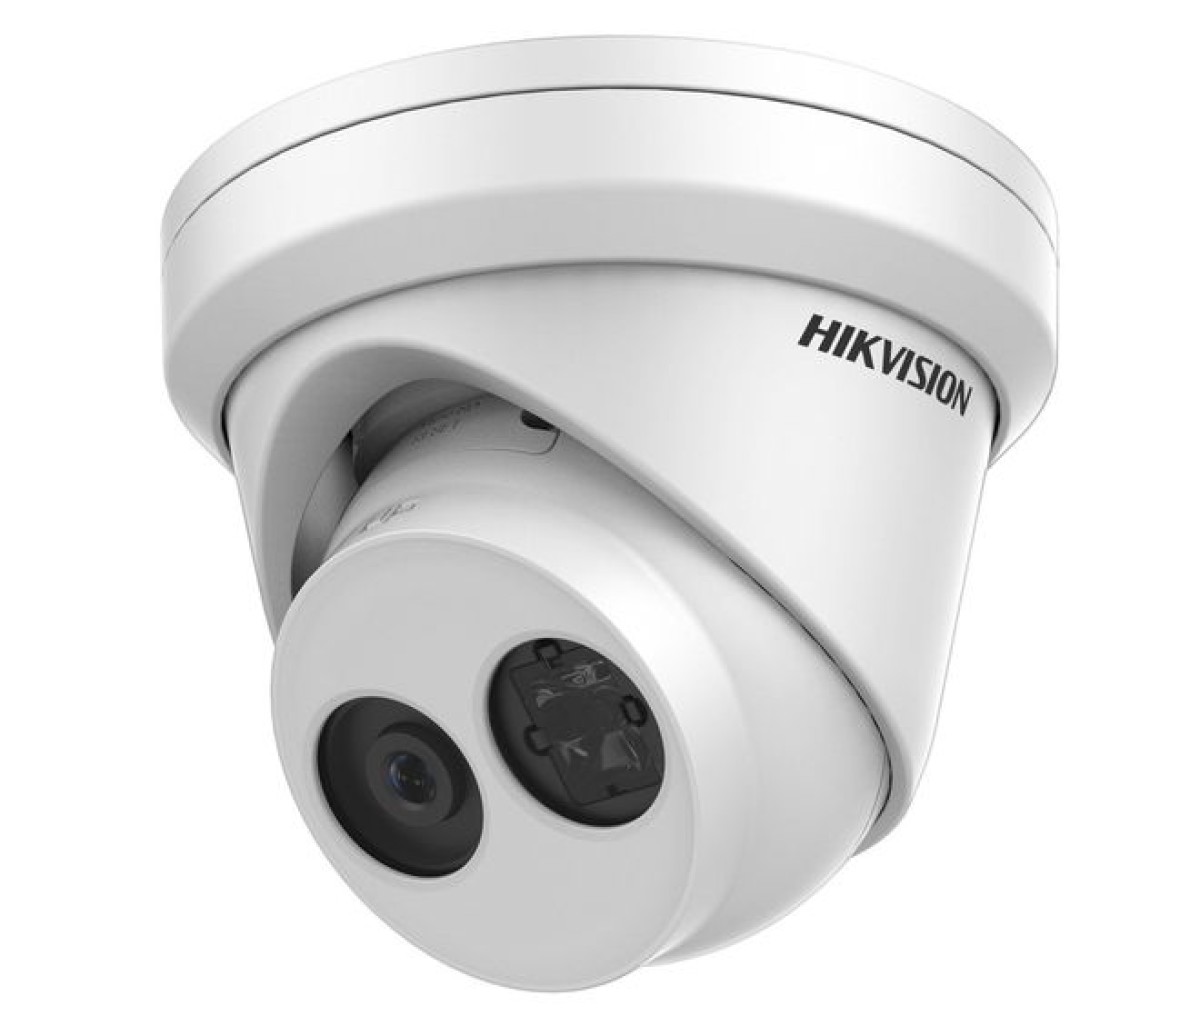 IP-камера Hikvision DS-2CD2325FWD-I (2.8) 98_85.jpeg